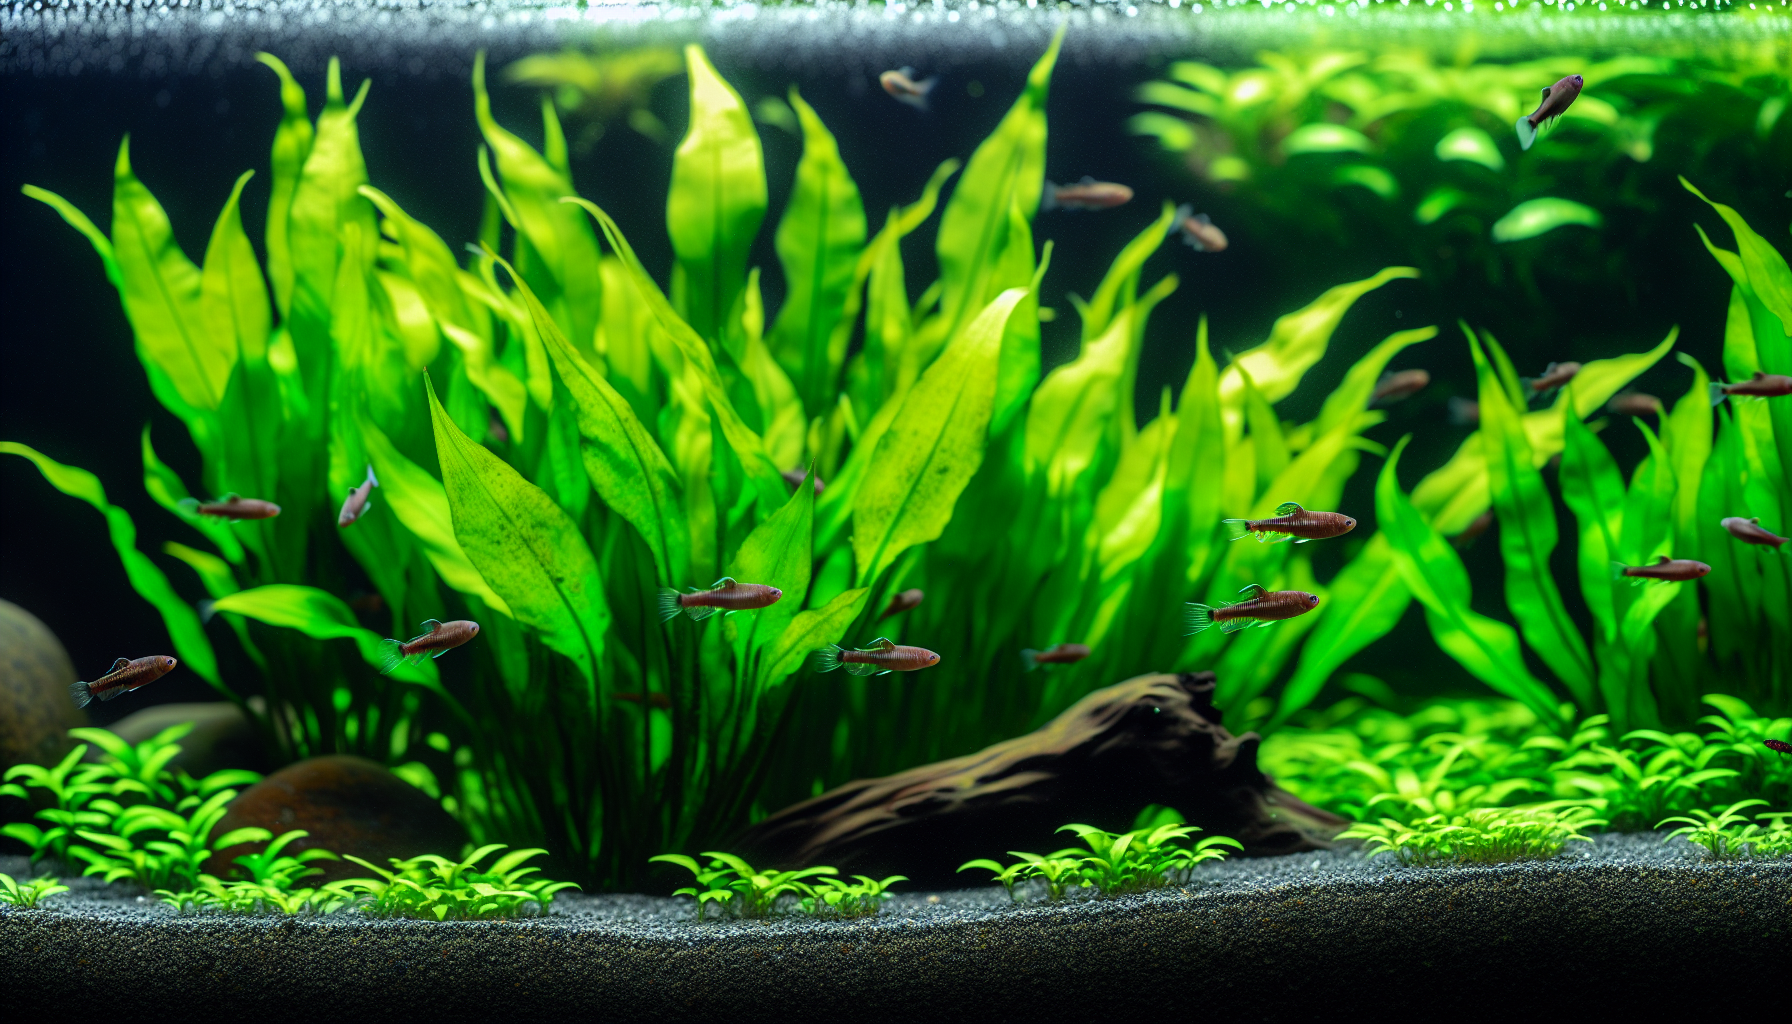 Aquascape with strategically placed Cryptocoryne plants